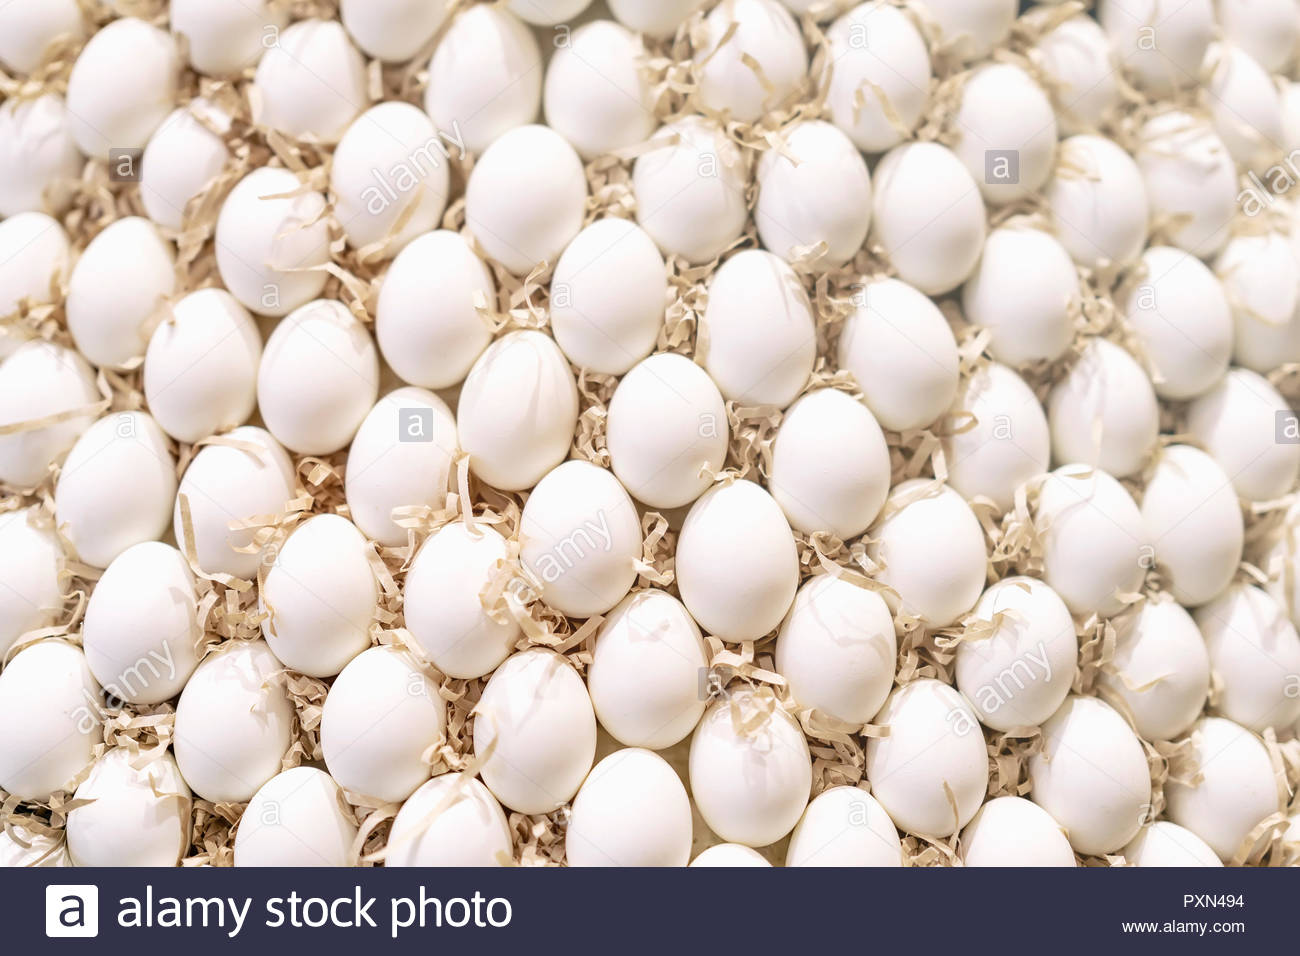 Many White Chicken Eggs Natural Background And Texture Selective